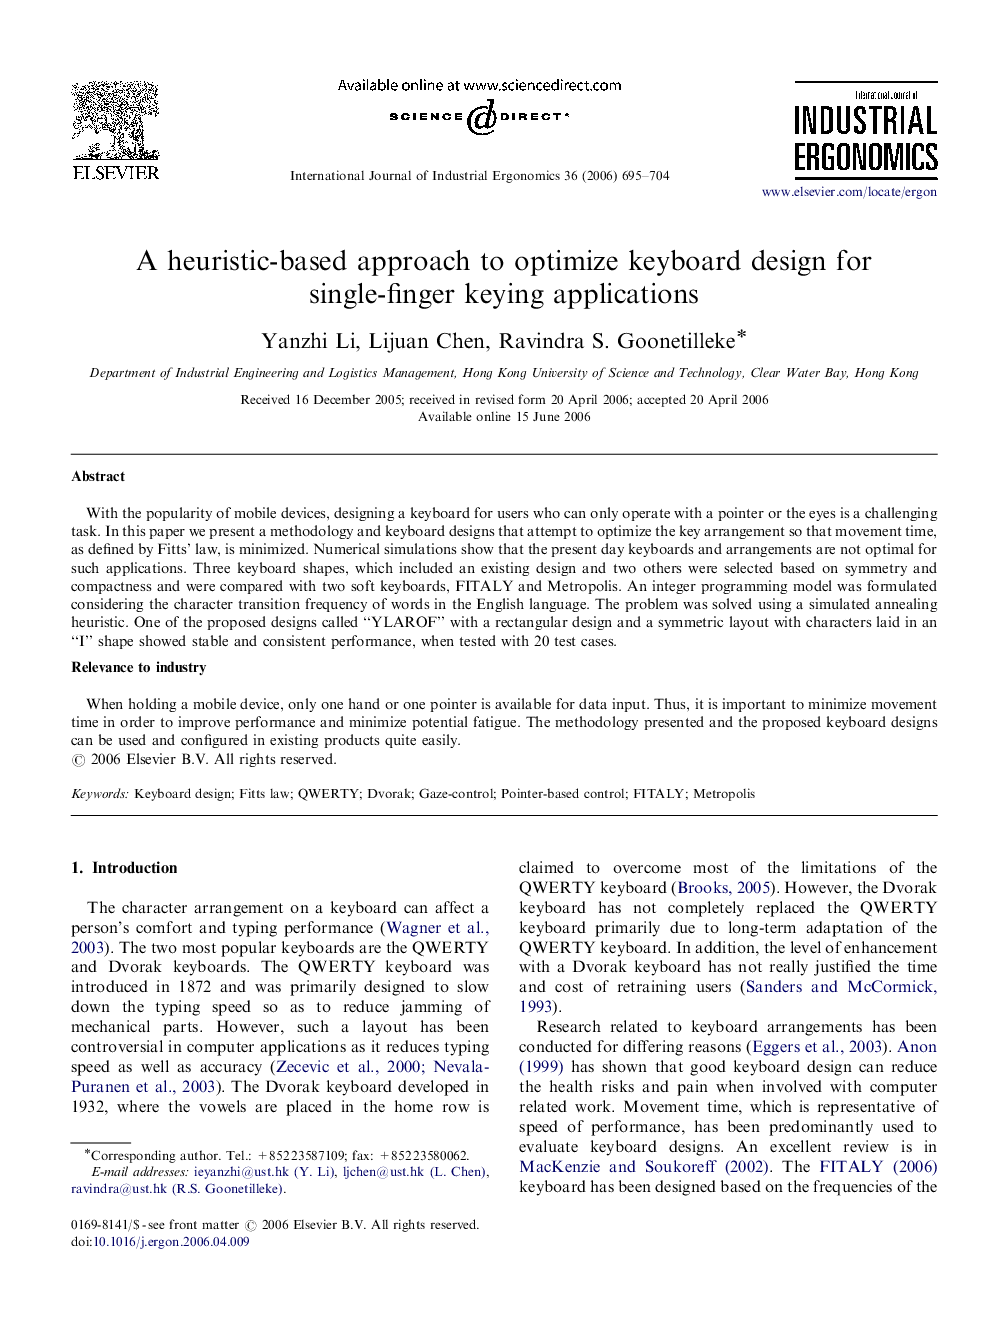 A heuristic-based approach to optimize keyboard design for single-finger keying applications